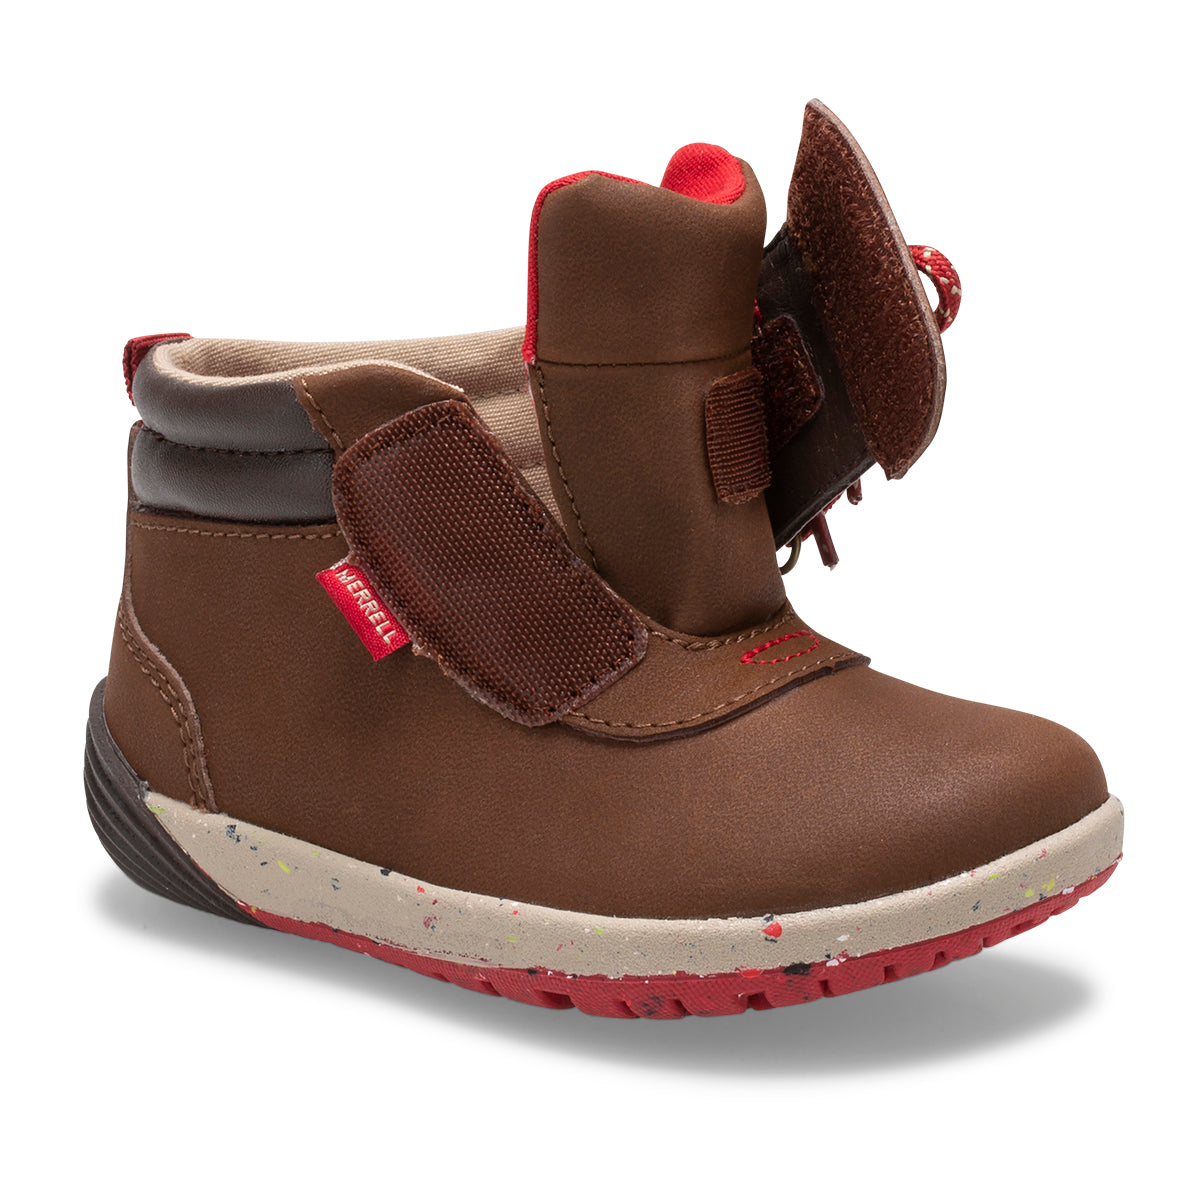 Little Kid's Bare Steps Boot 2.0 Jr. - Brown Leather